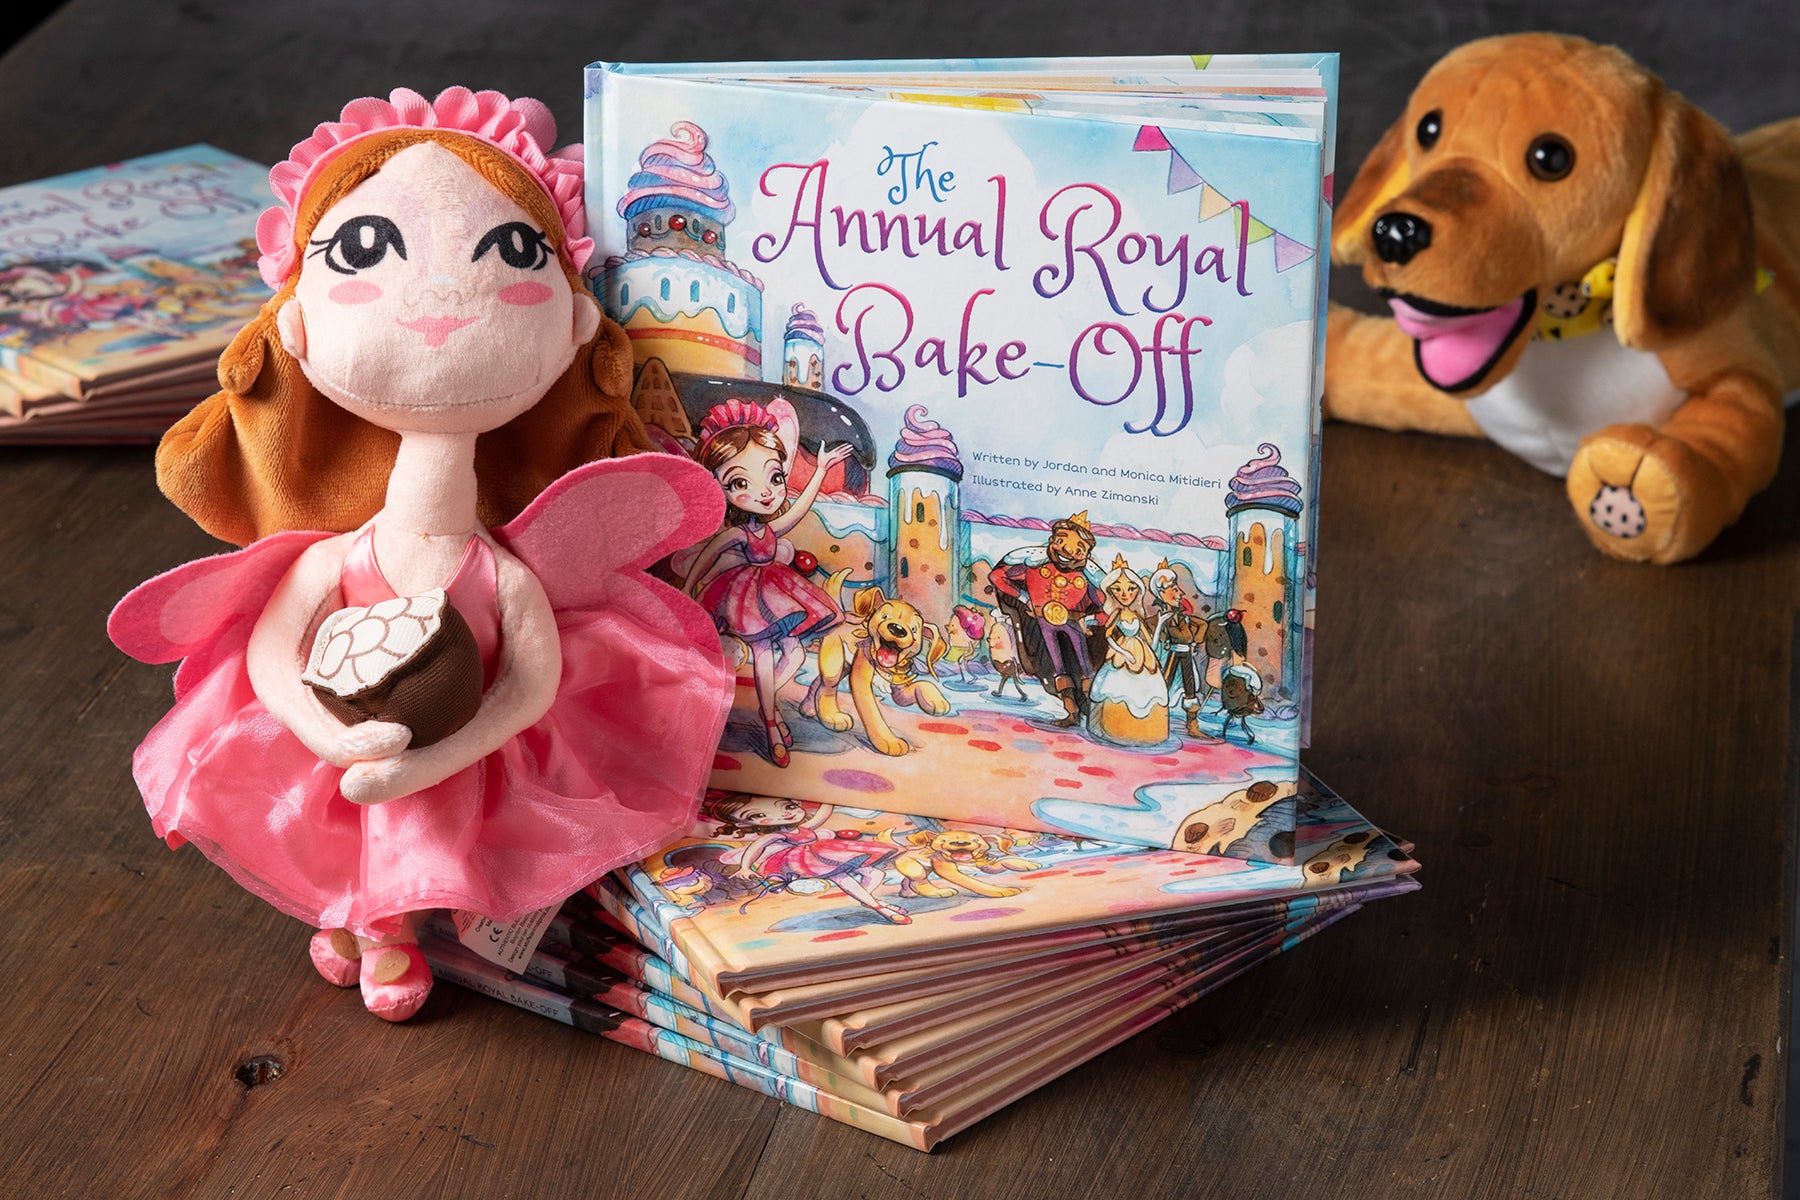 Our children's book with our two favorite characters, Lemmy the dog, and Sugarbelle, The Cookie Fairy. | Monica's Gourmet Cookies